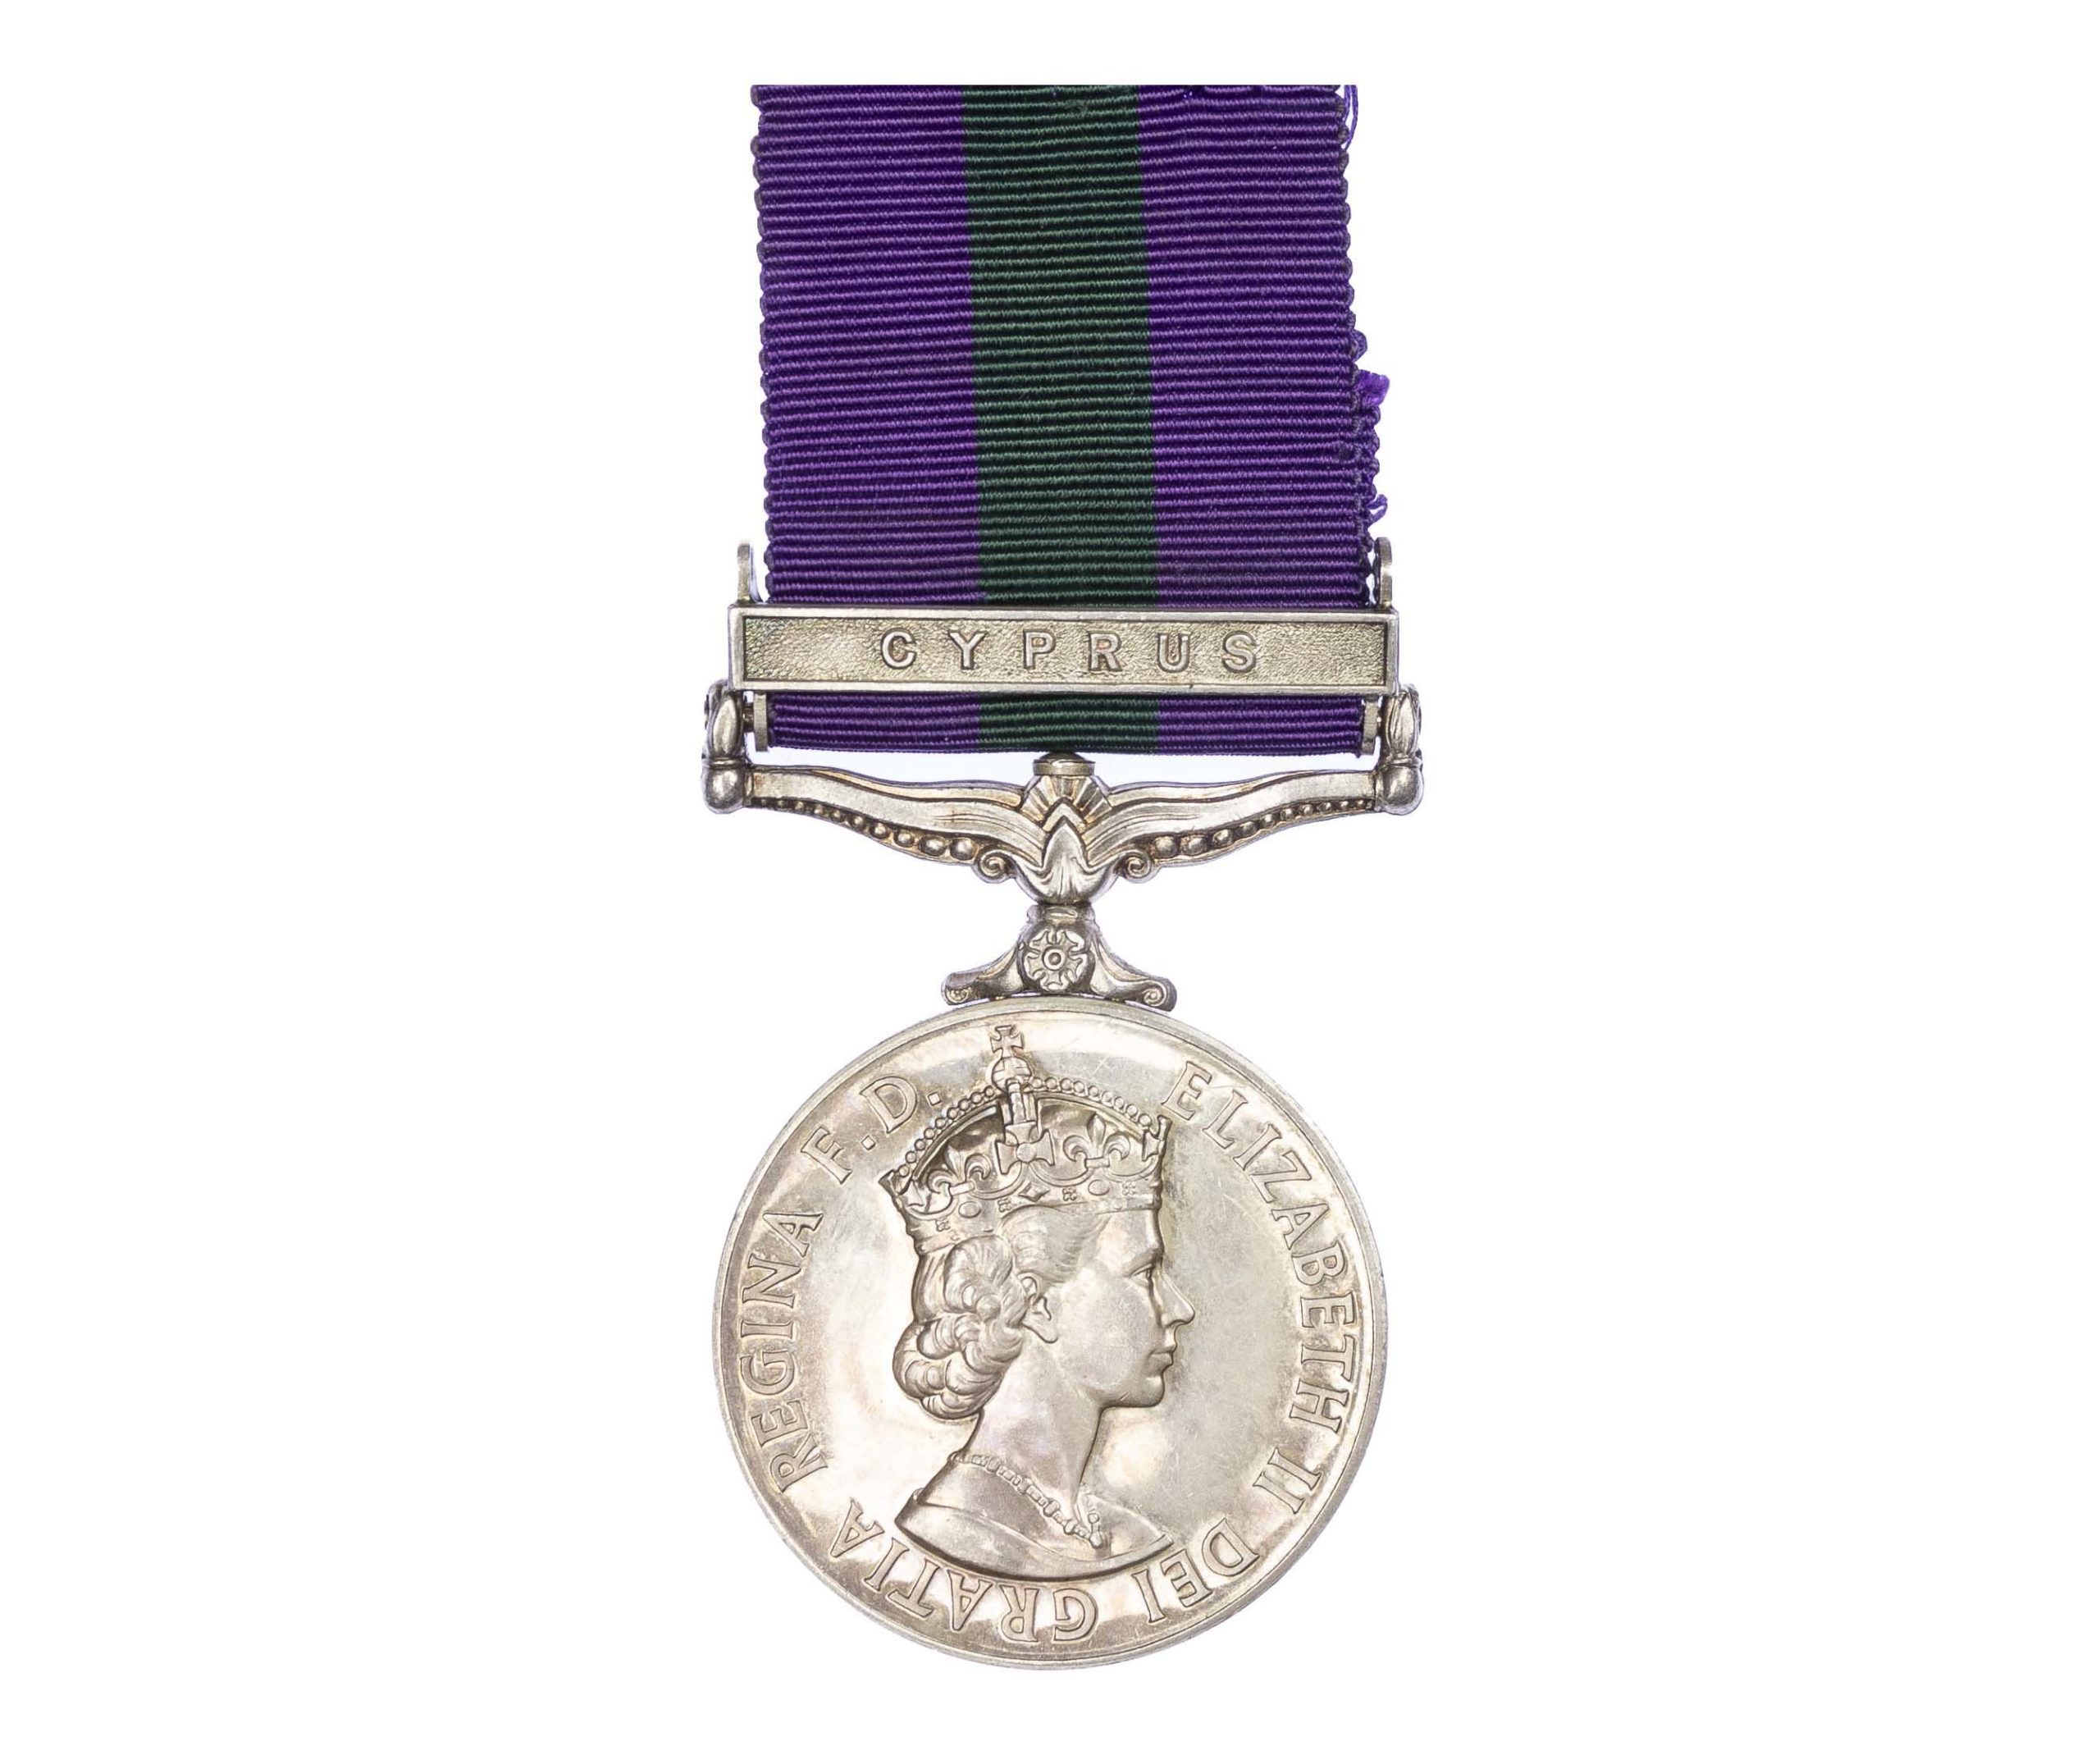 General Service Medal 1918-62, EiiR, one clasp, Cyprus, to Junior Technician J.A. Coppendale